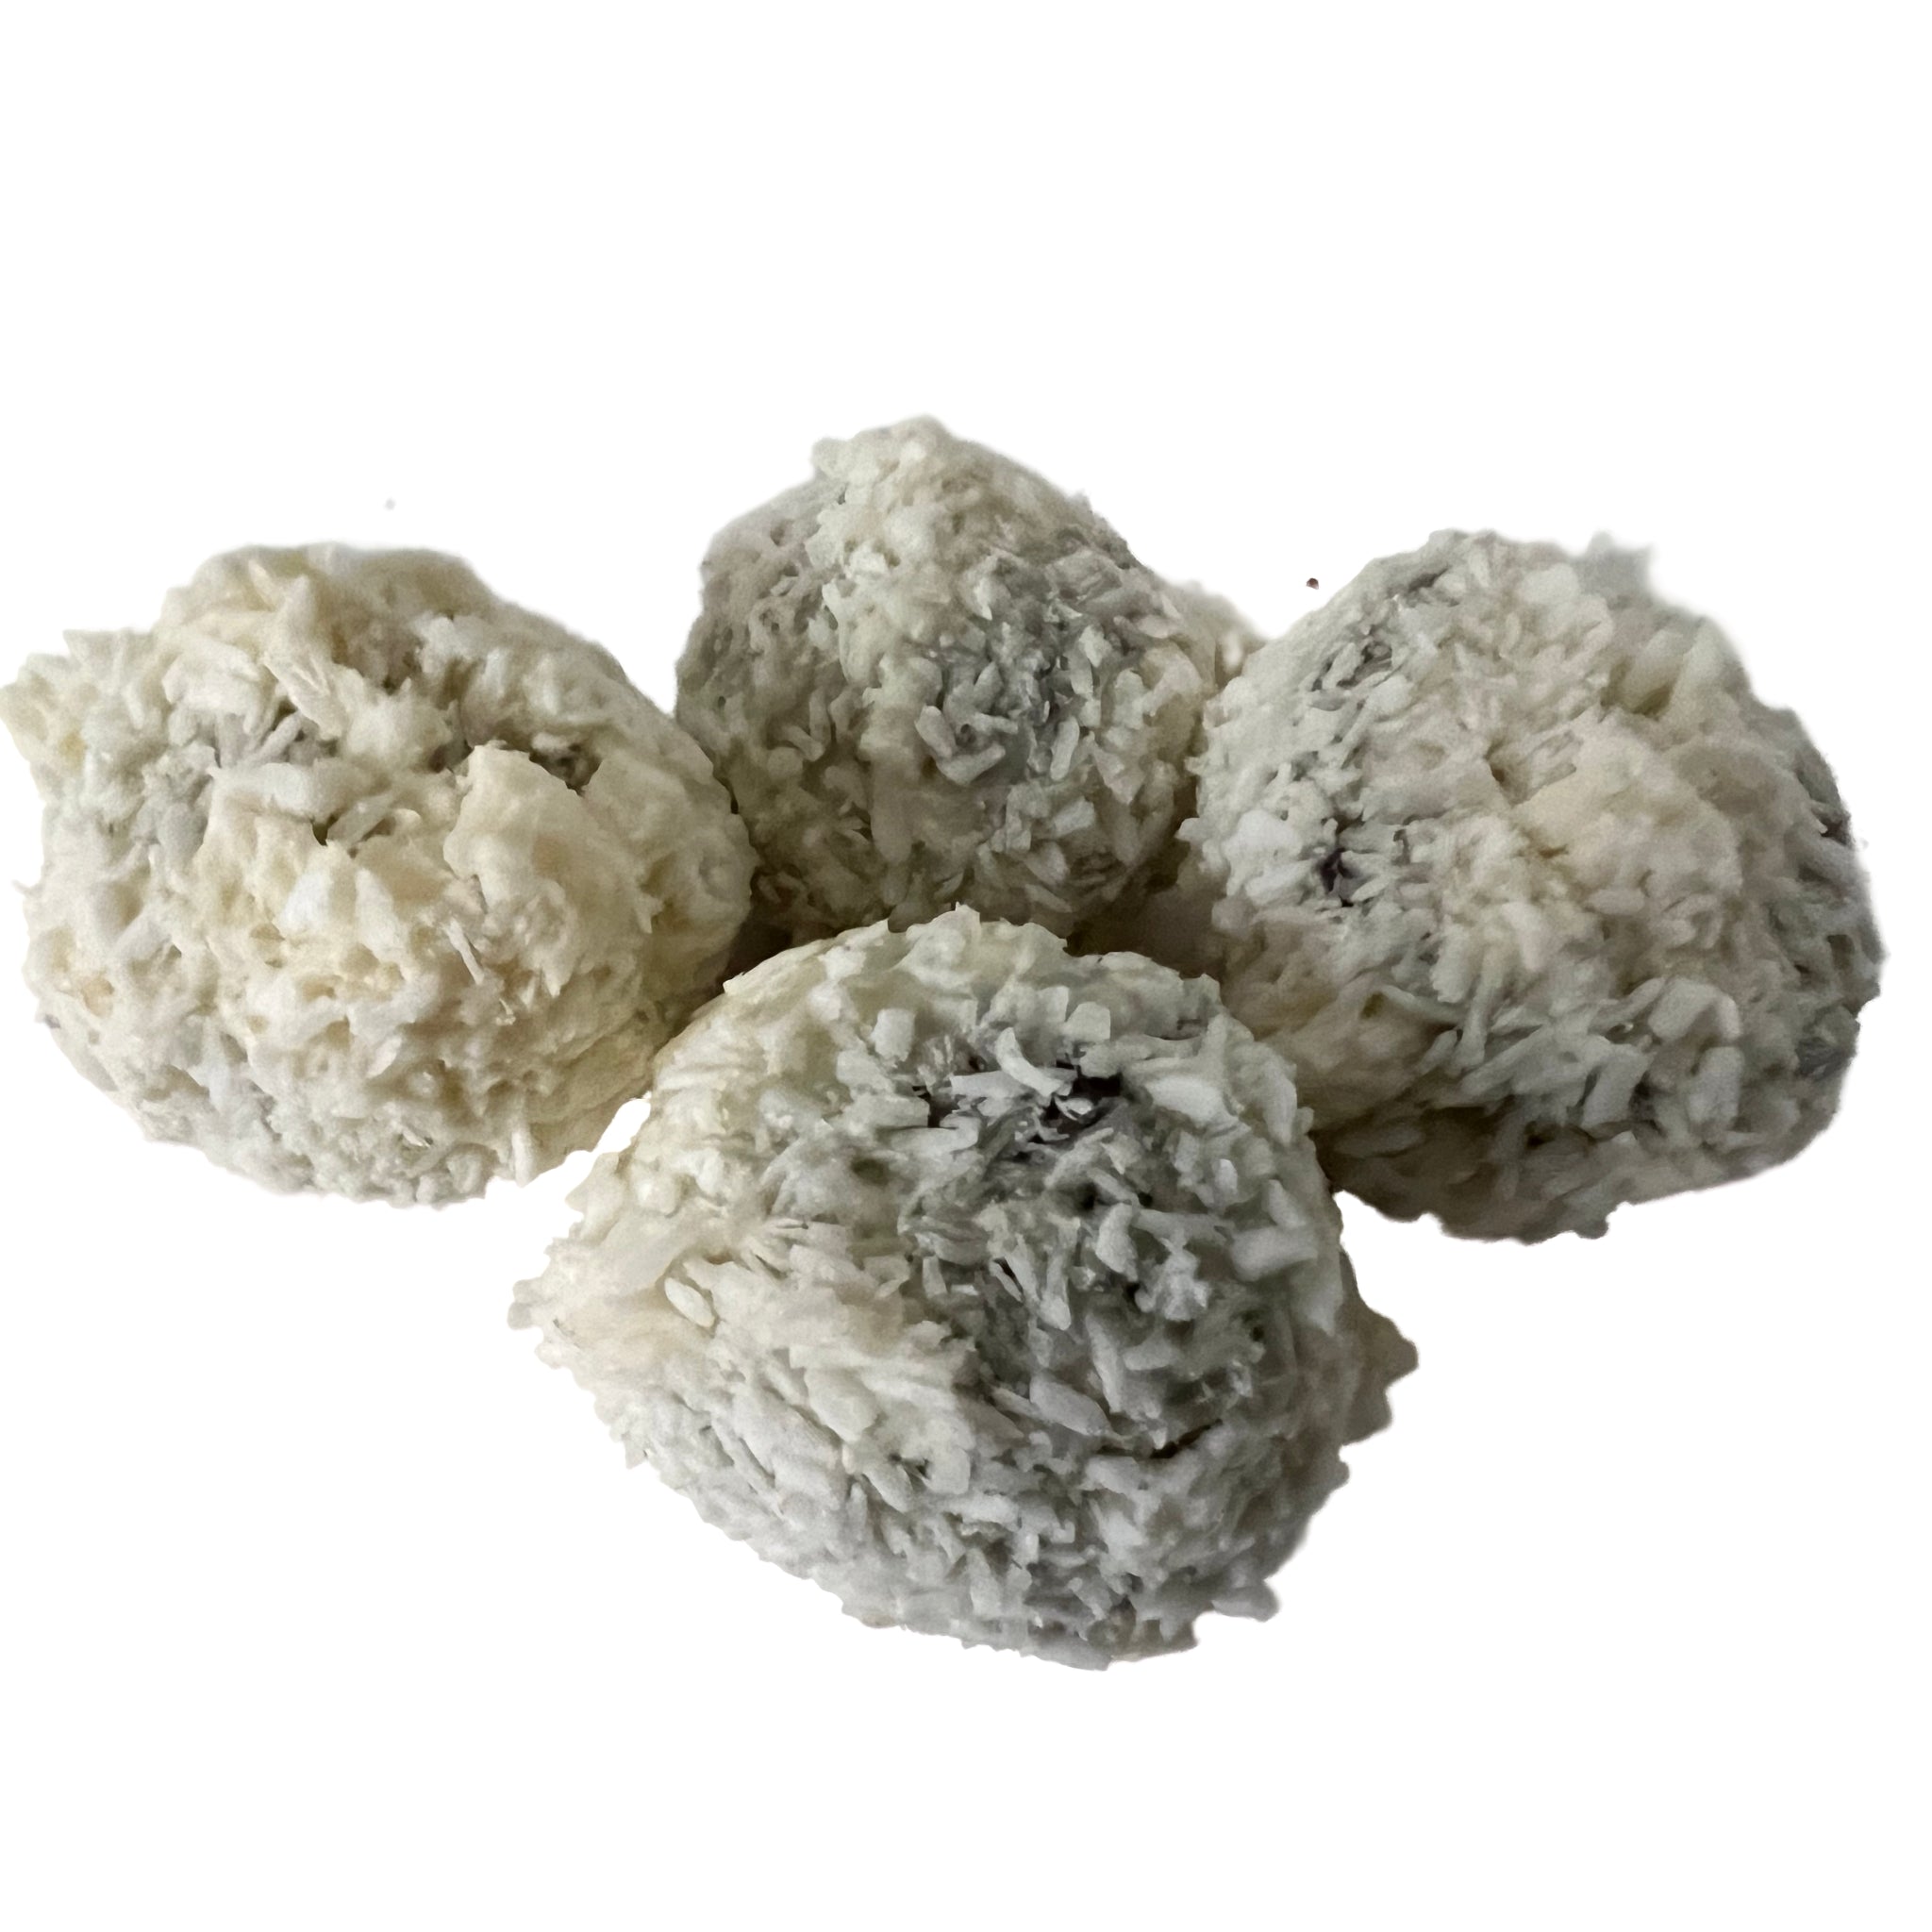 Coconut Snowball Dark Chocolate Truffle.  Round snowball with white center covered with a layer of caramel, then a layer of dark chocolate topped with a white sugared coconut topping.